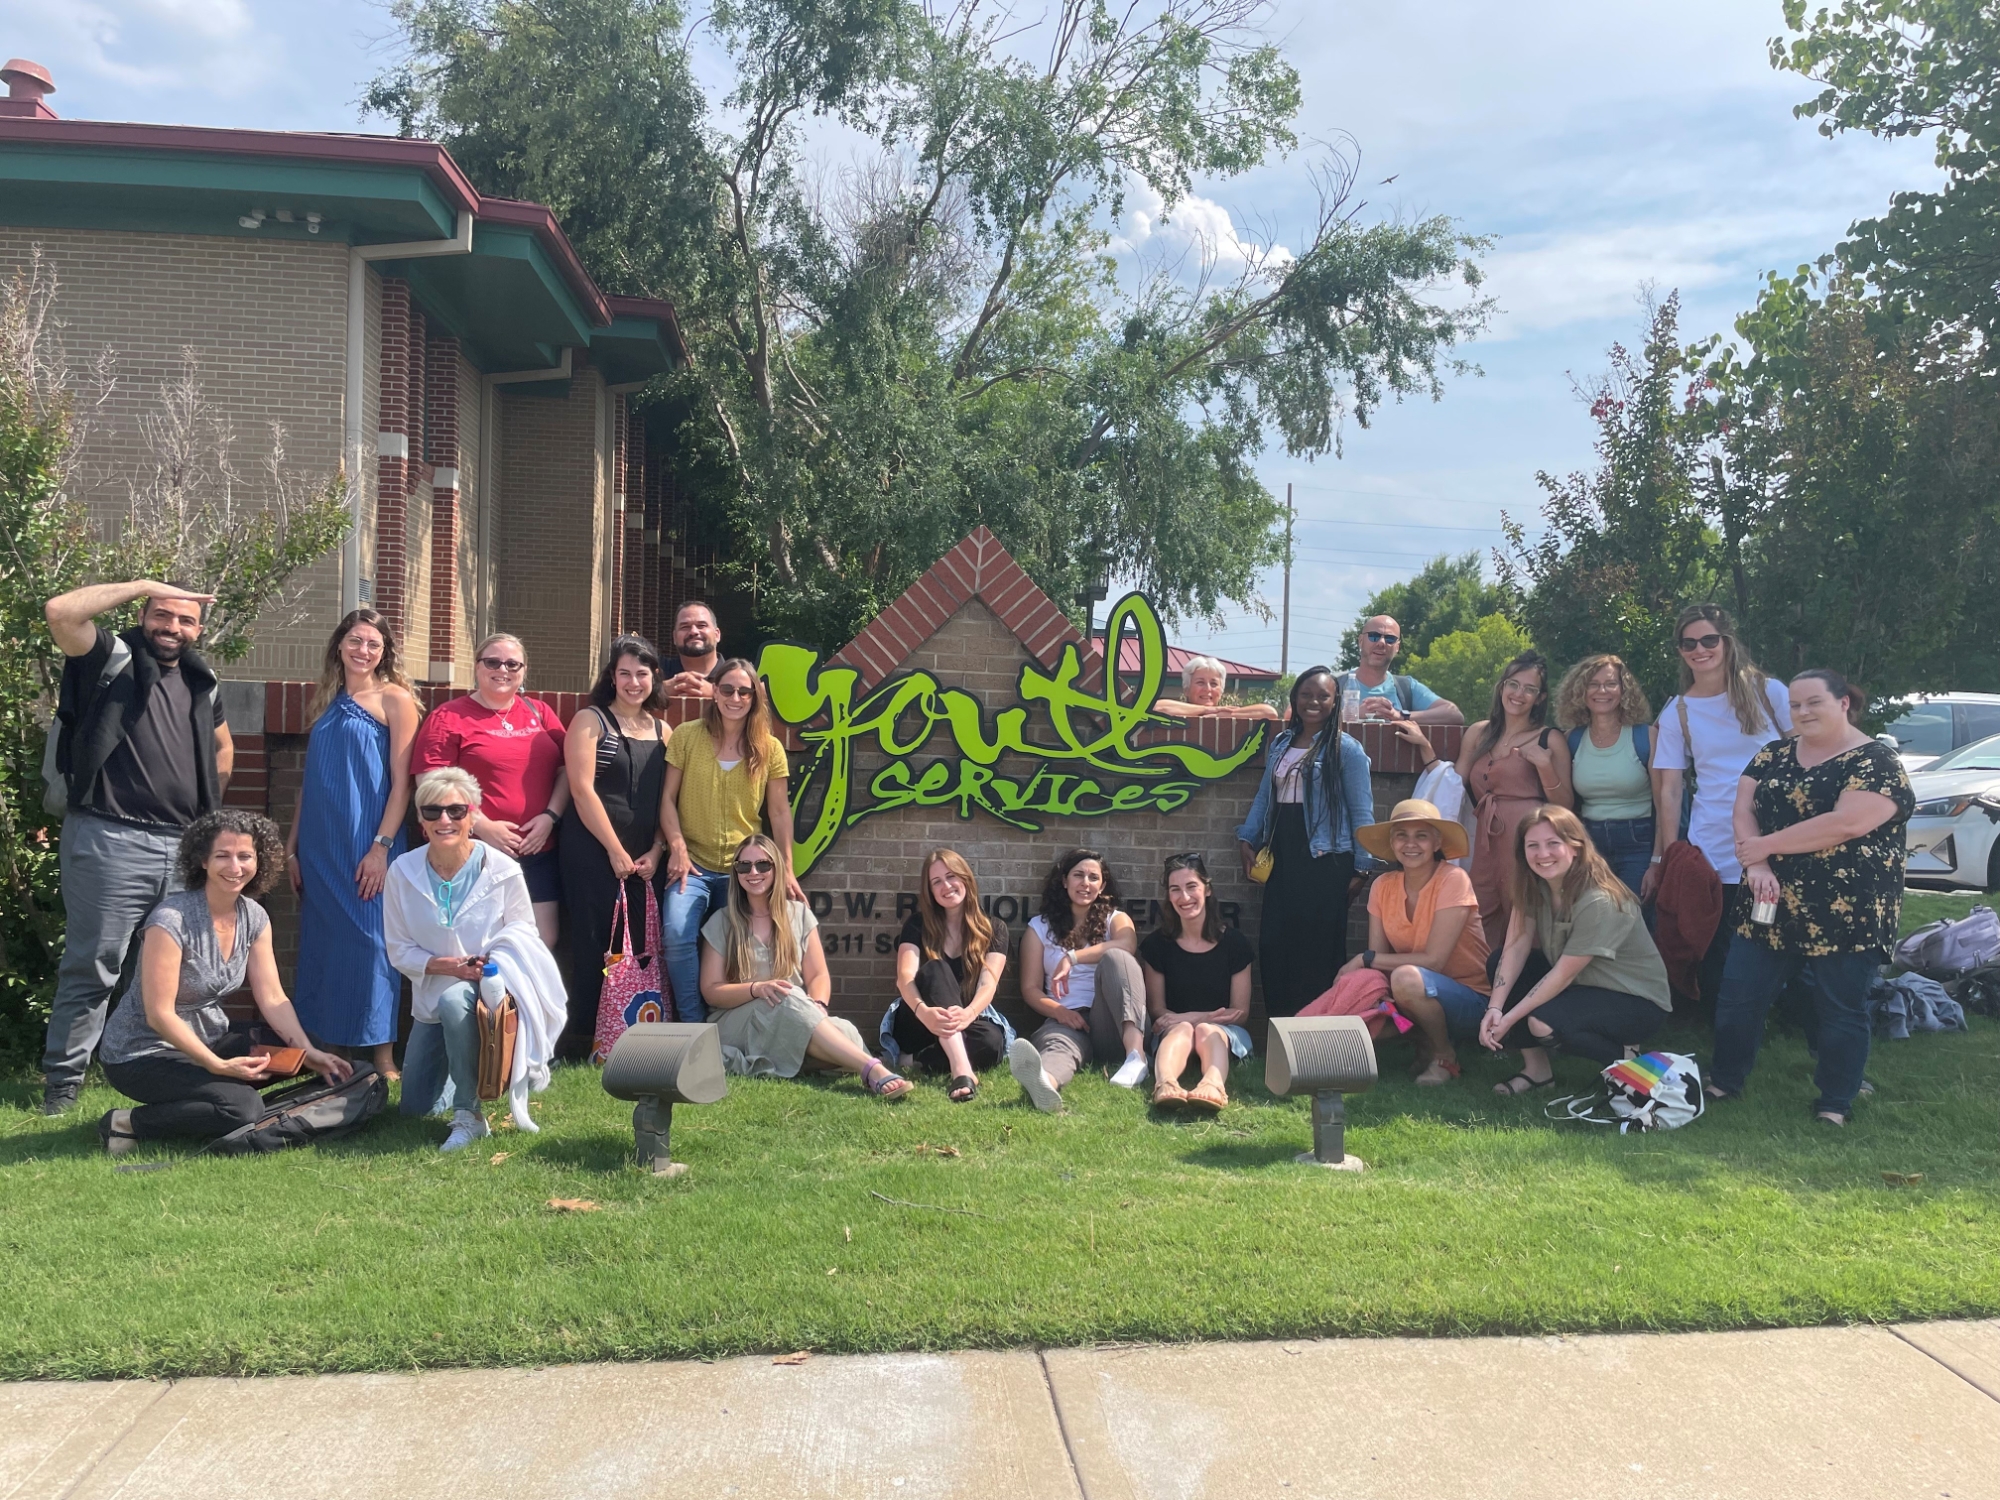 Social work exchange program participants visiting Youth Services of Tulsa